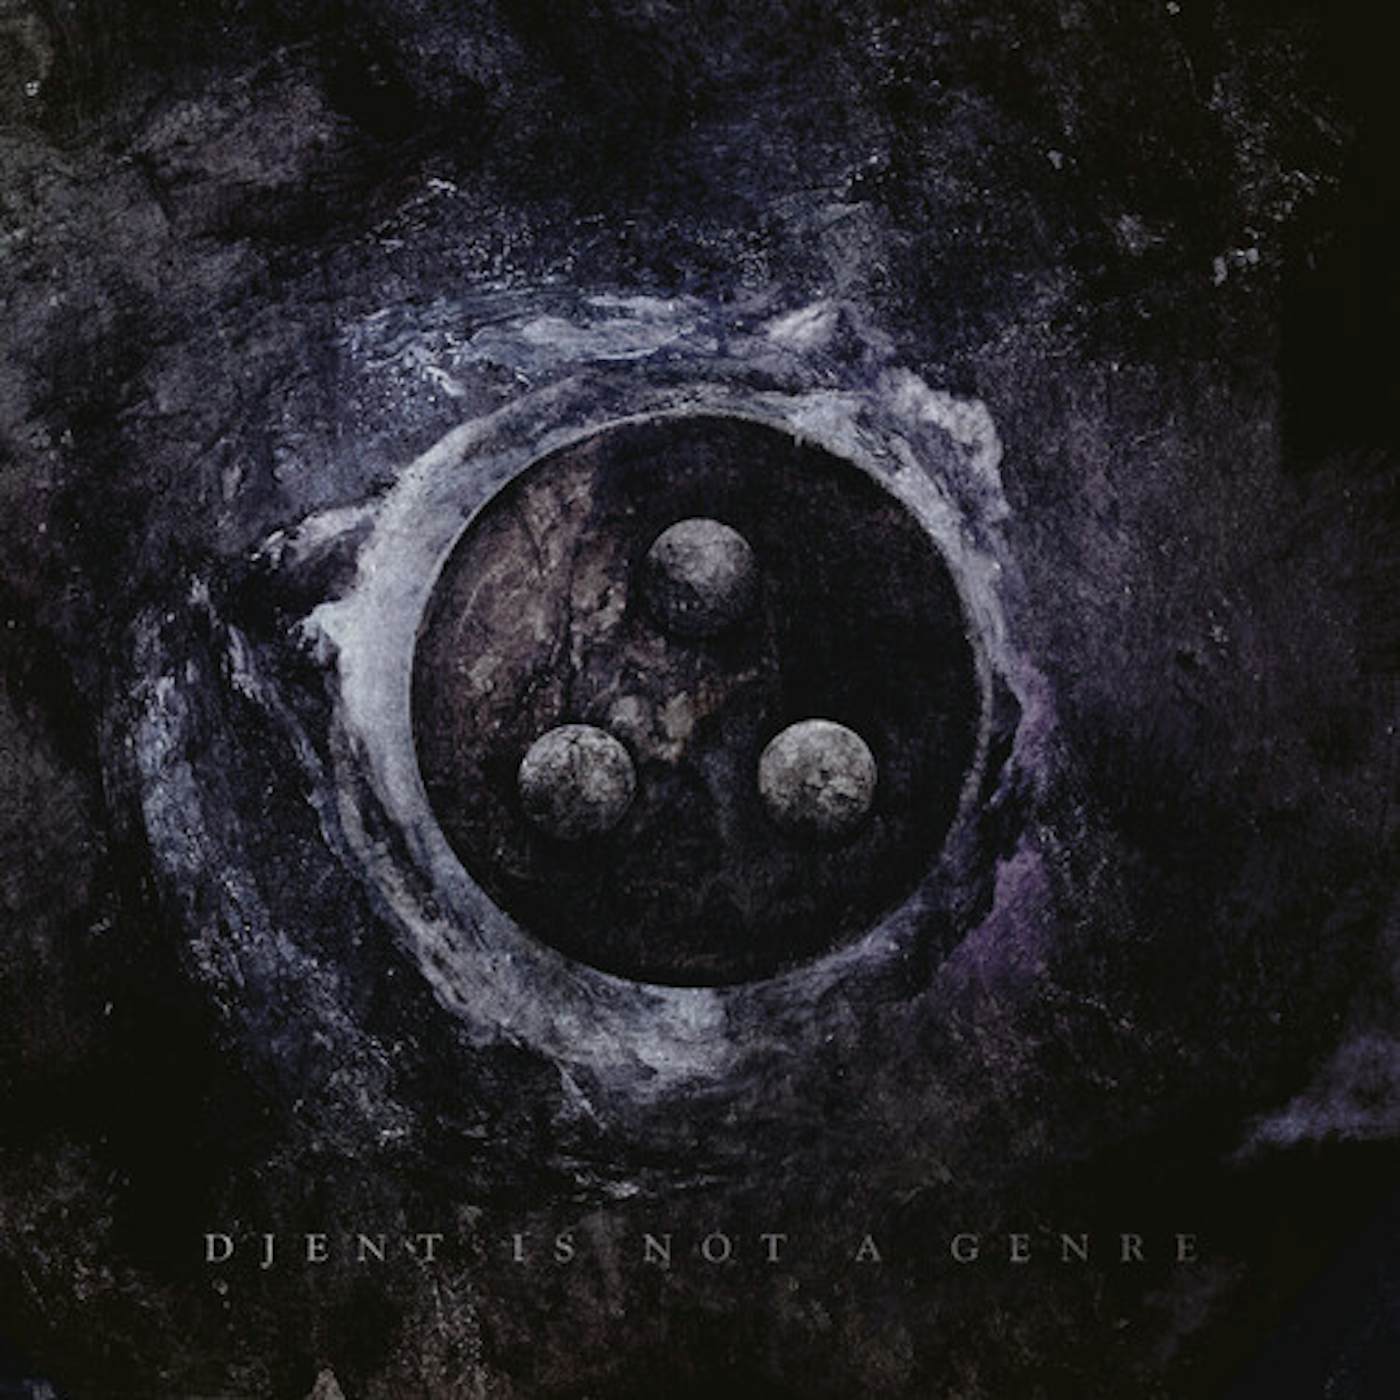 PERIPHERY V: DJENT IS NOT A GENRE CD